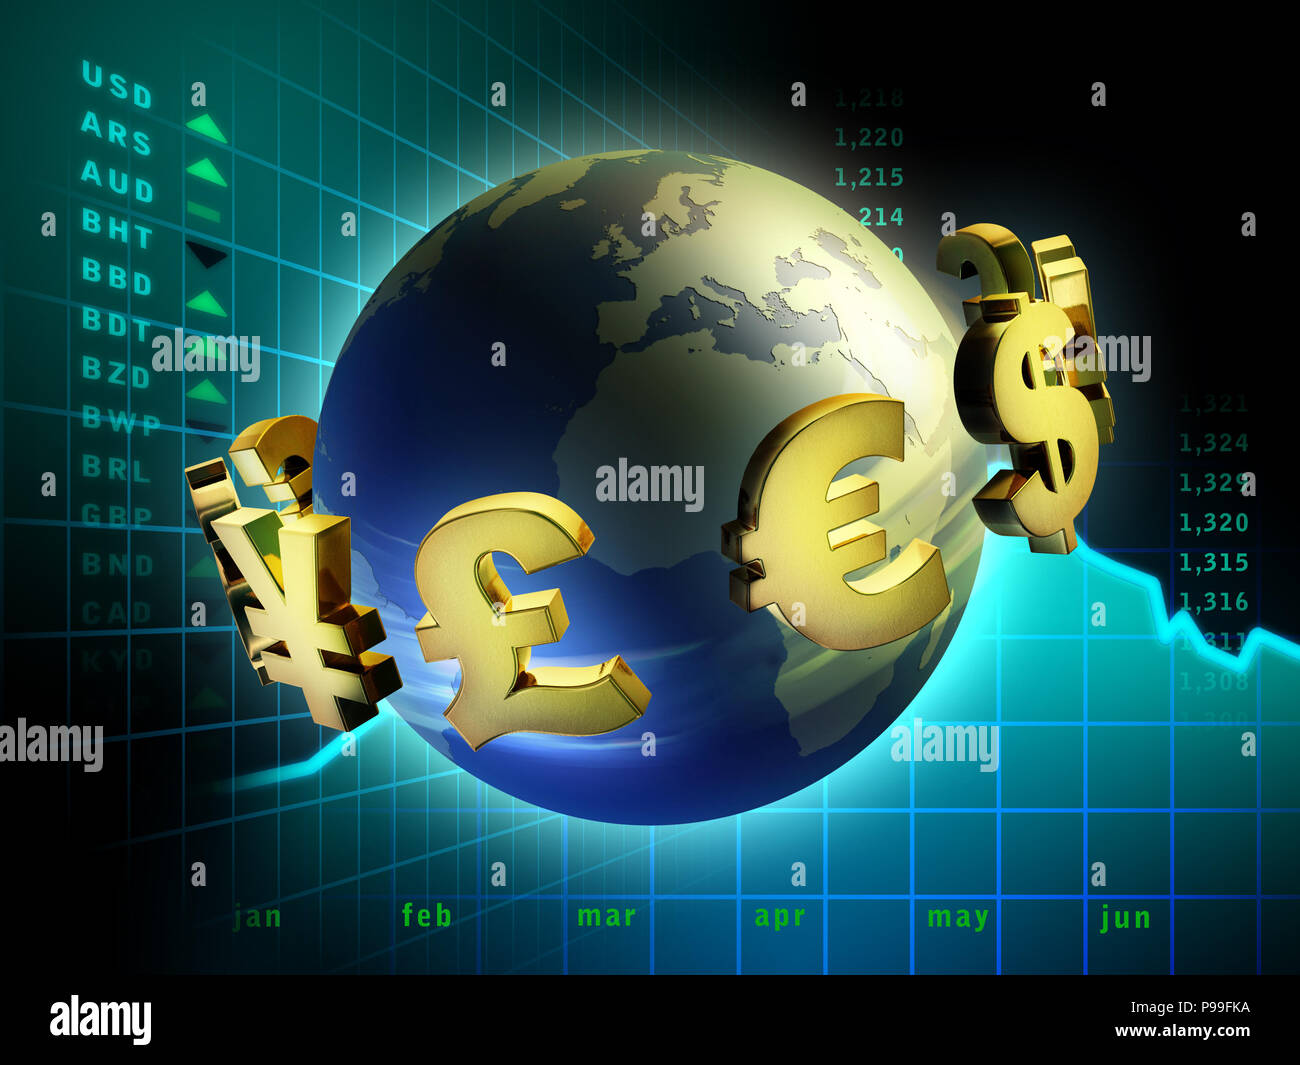 Currency symbols moving around planet Earth. Digital illustration. Stock Photo